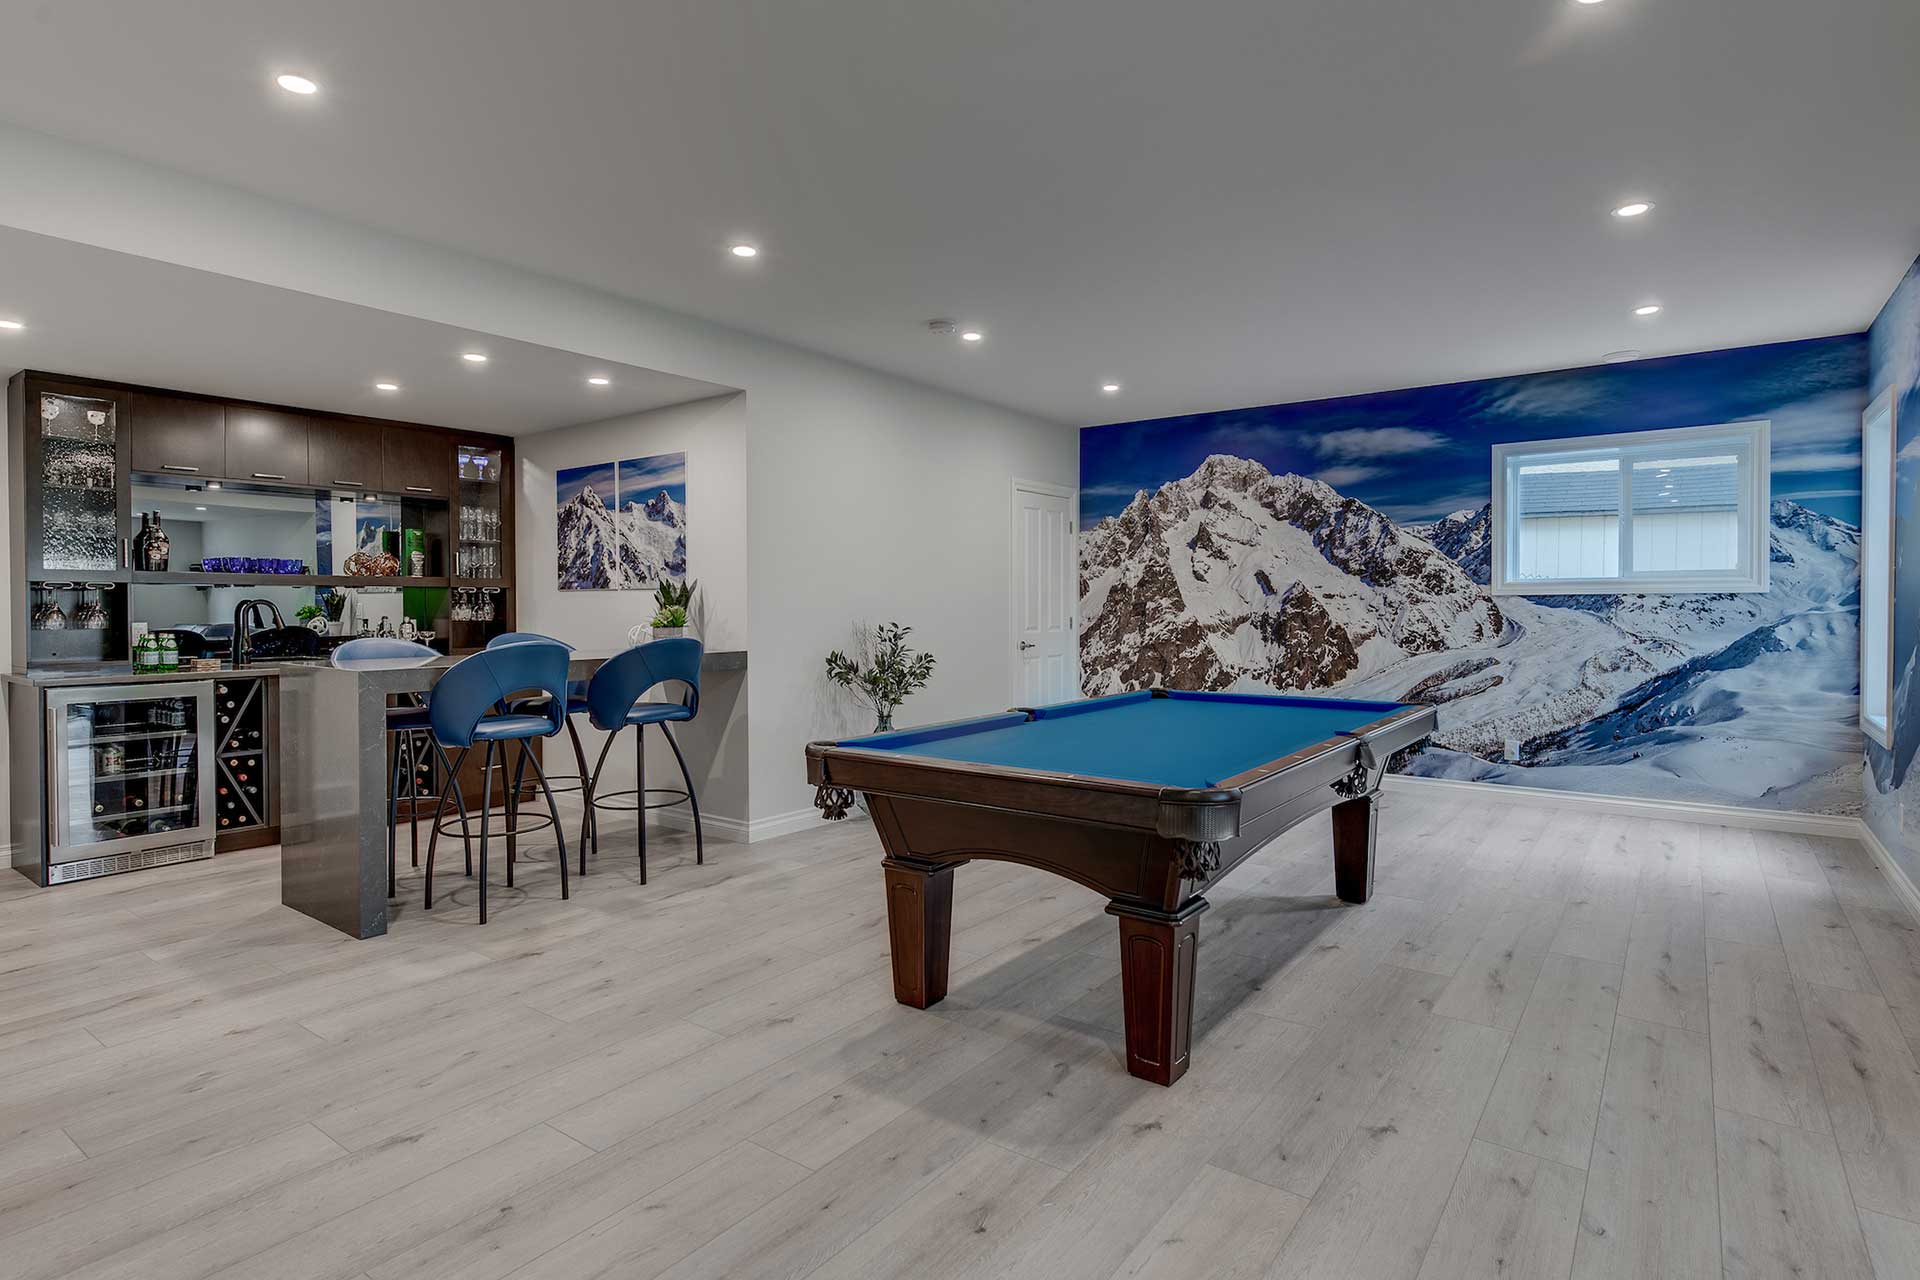 pool table in room with mural of a snow-covered mountain